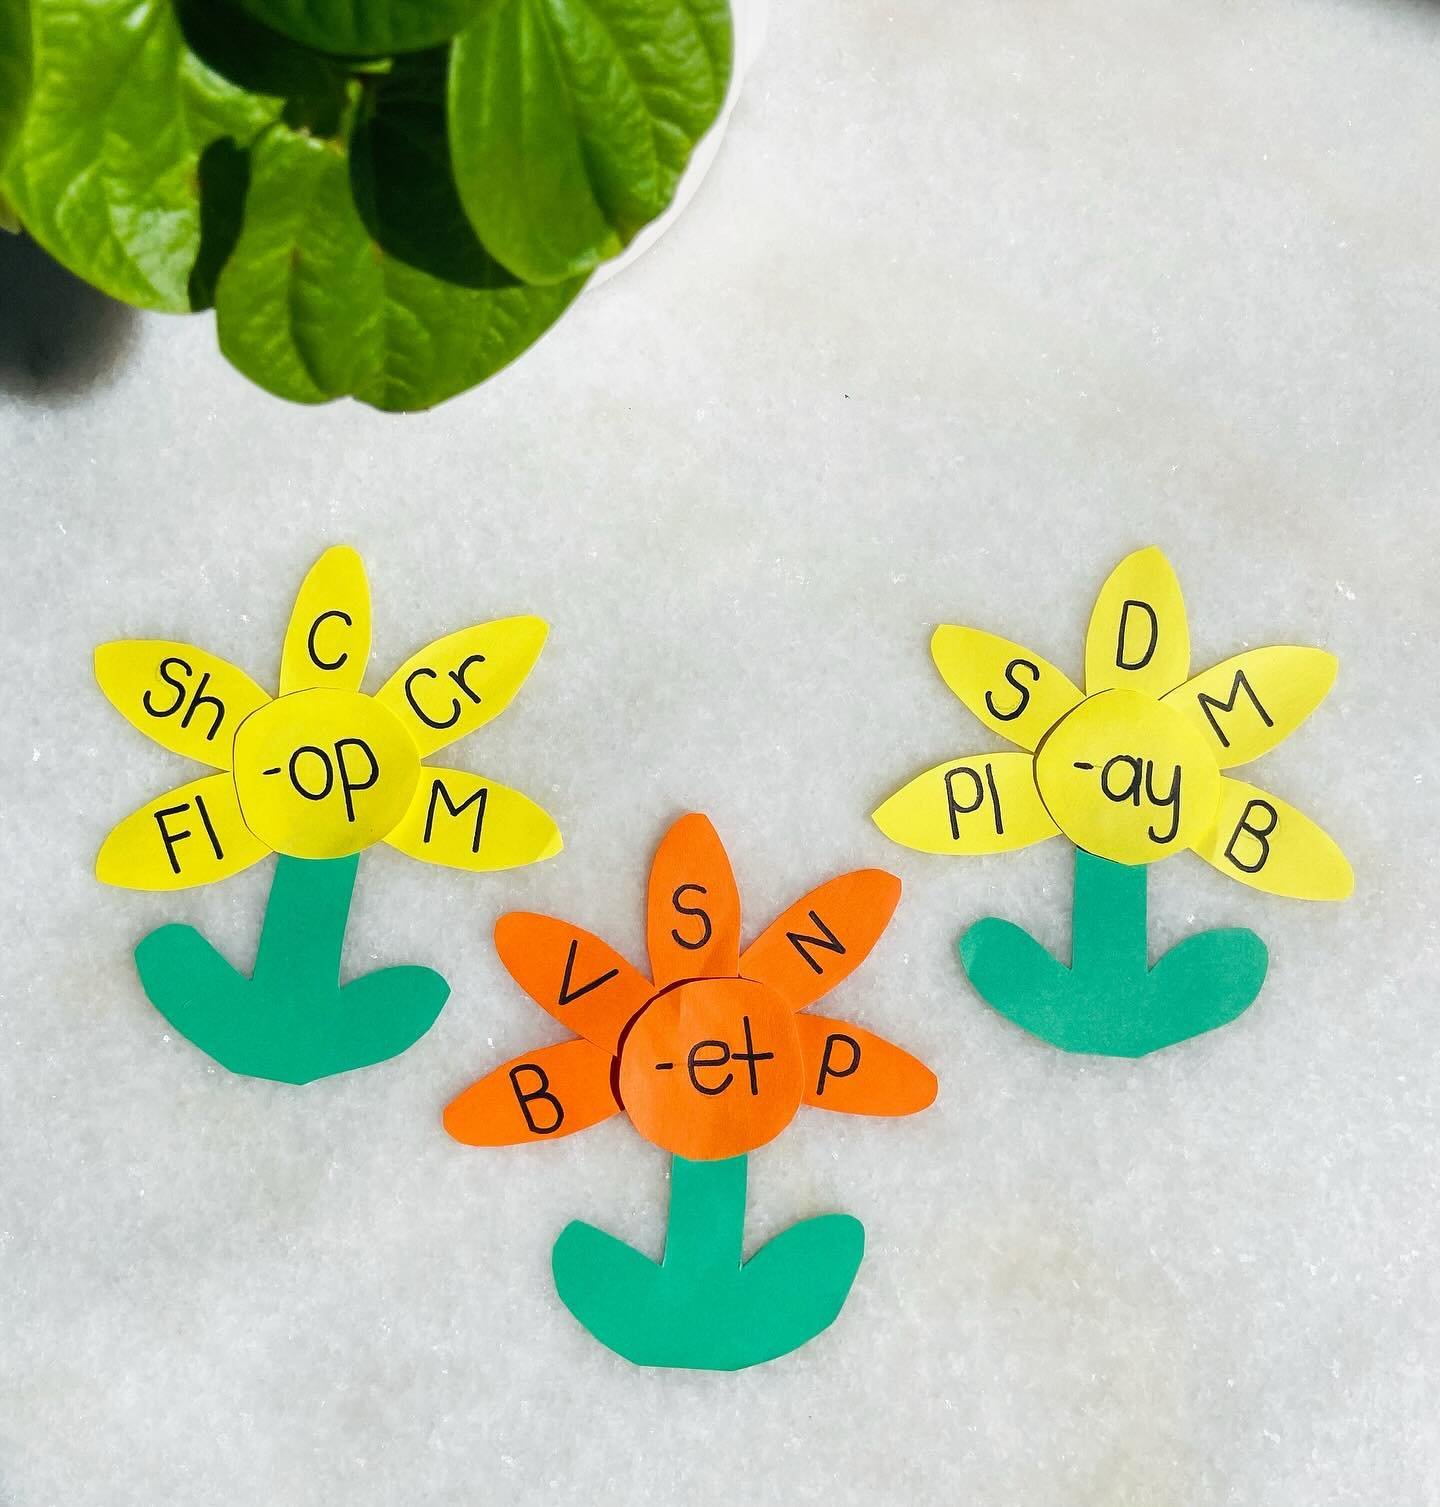 Blending Sounds 🌸💬

Blending is the skill of joining individual speech sounds (phonemes) together to make a word. 

It&rsquo;s an important skill for learning to read and spell 📚

Here&rsquo;s a fun activity that&rsquo;ll keep your kids entertaine